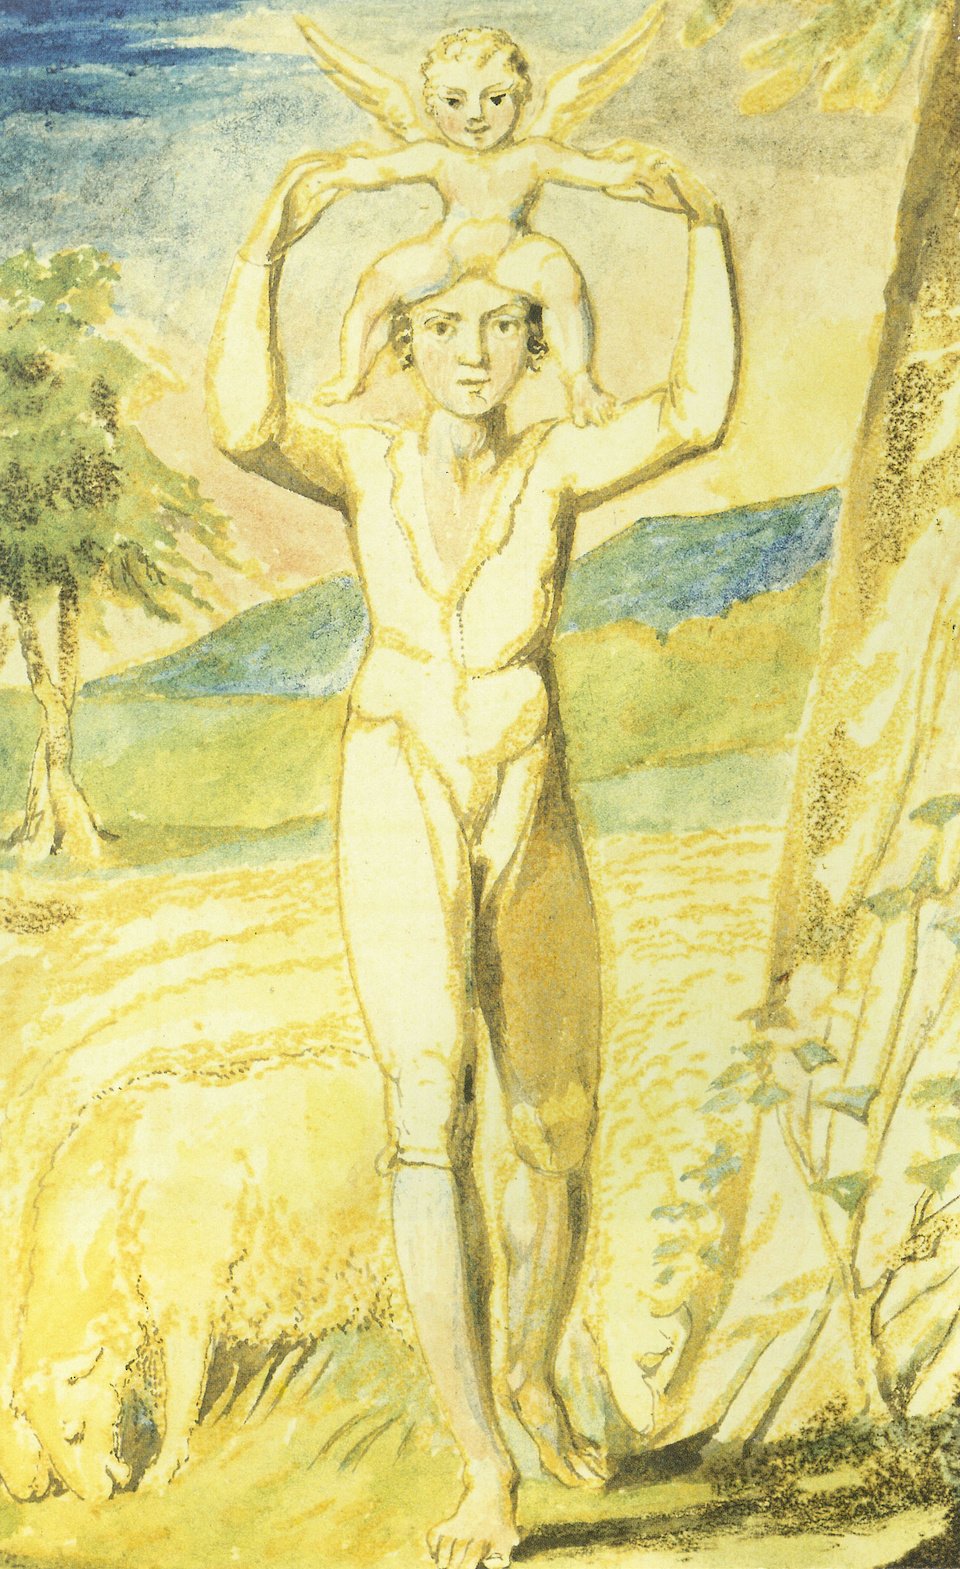 William Blake’s frontispiece to Songs of Experience (1794) is an extraordinarily prophetic image of nurturing or love-indoctrination liberating consciousness.